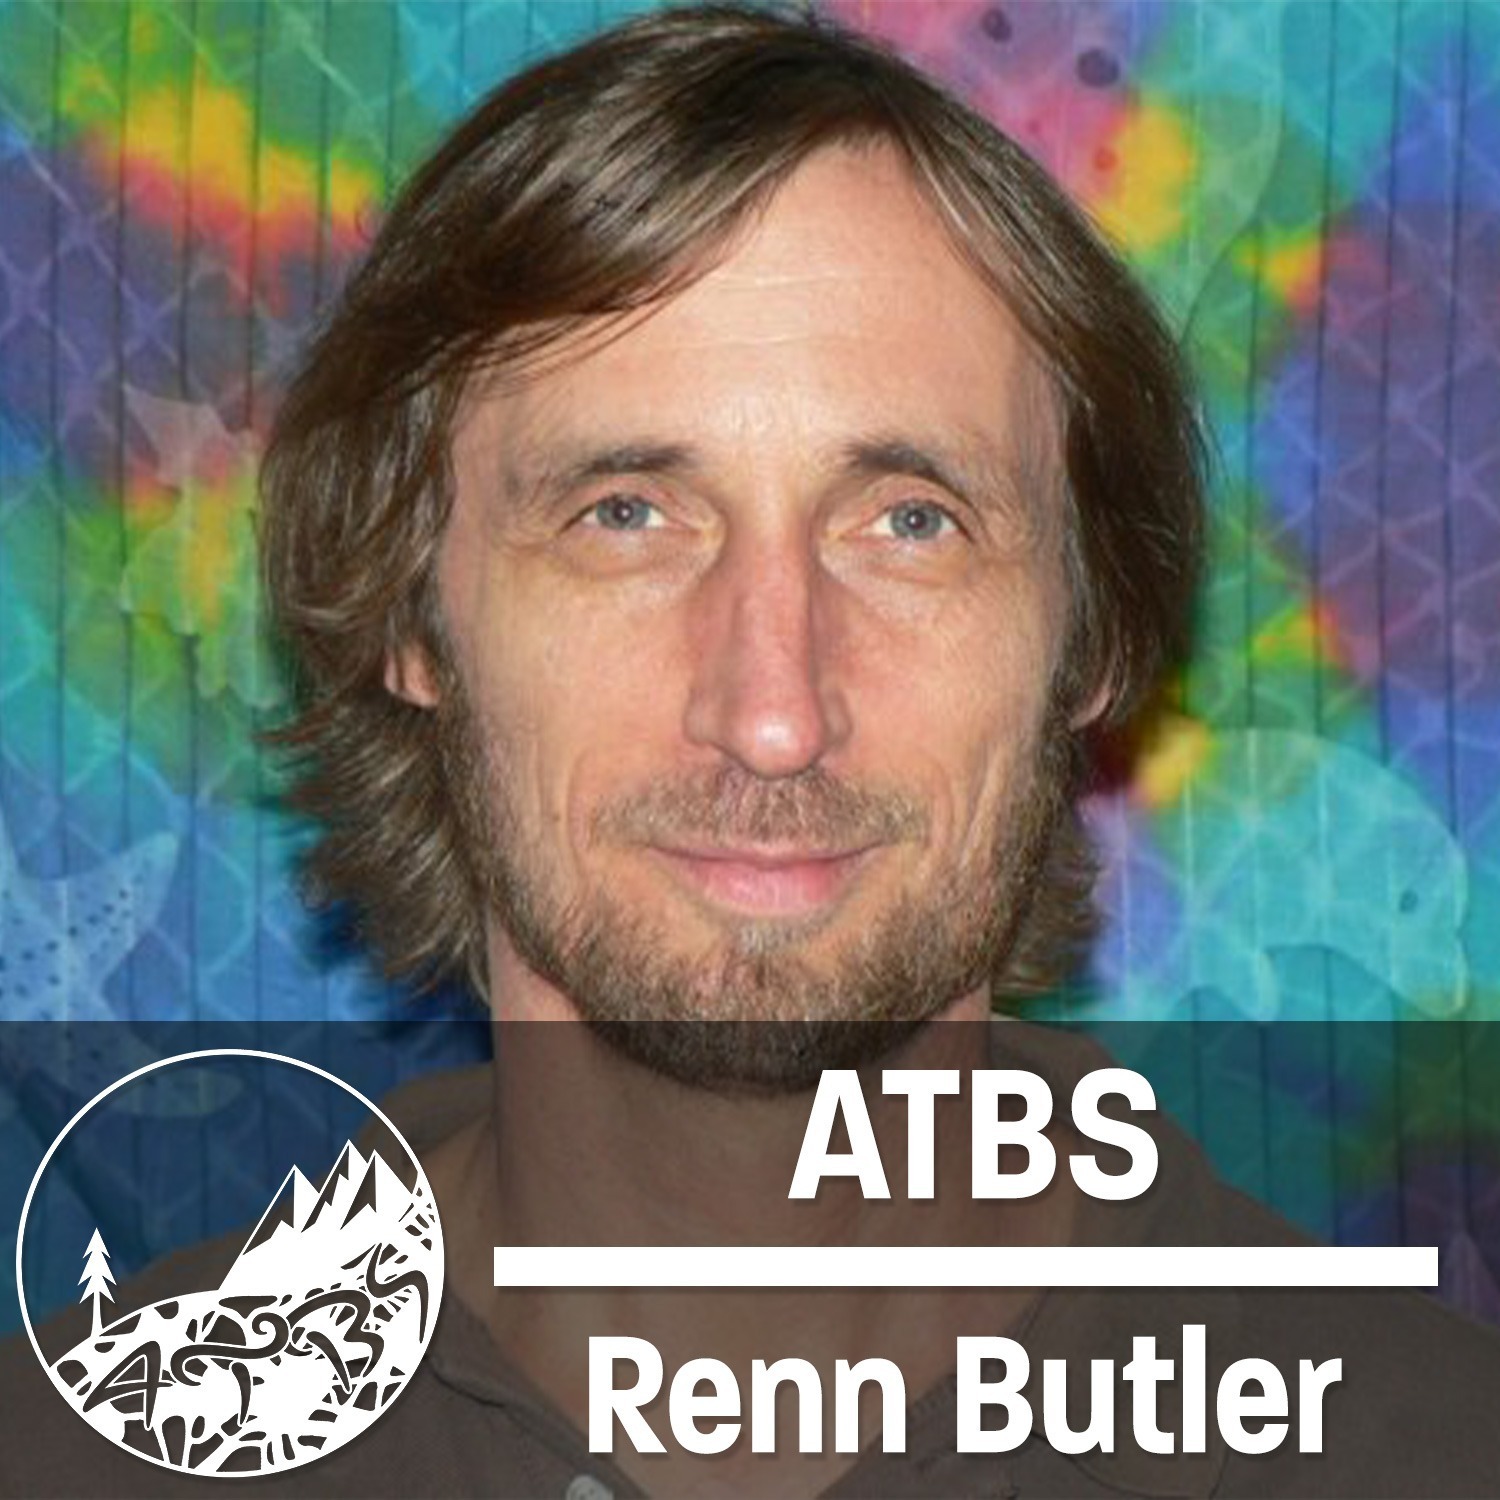 2020: An Astrological Perspective - With Renn Butler - ATBS - #35 - With Renn Butler - ATBS - #35